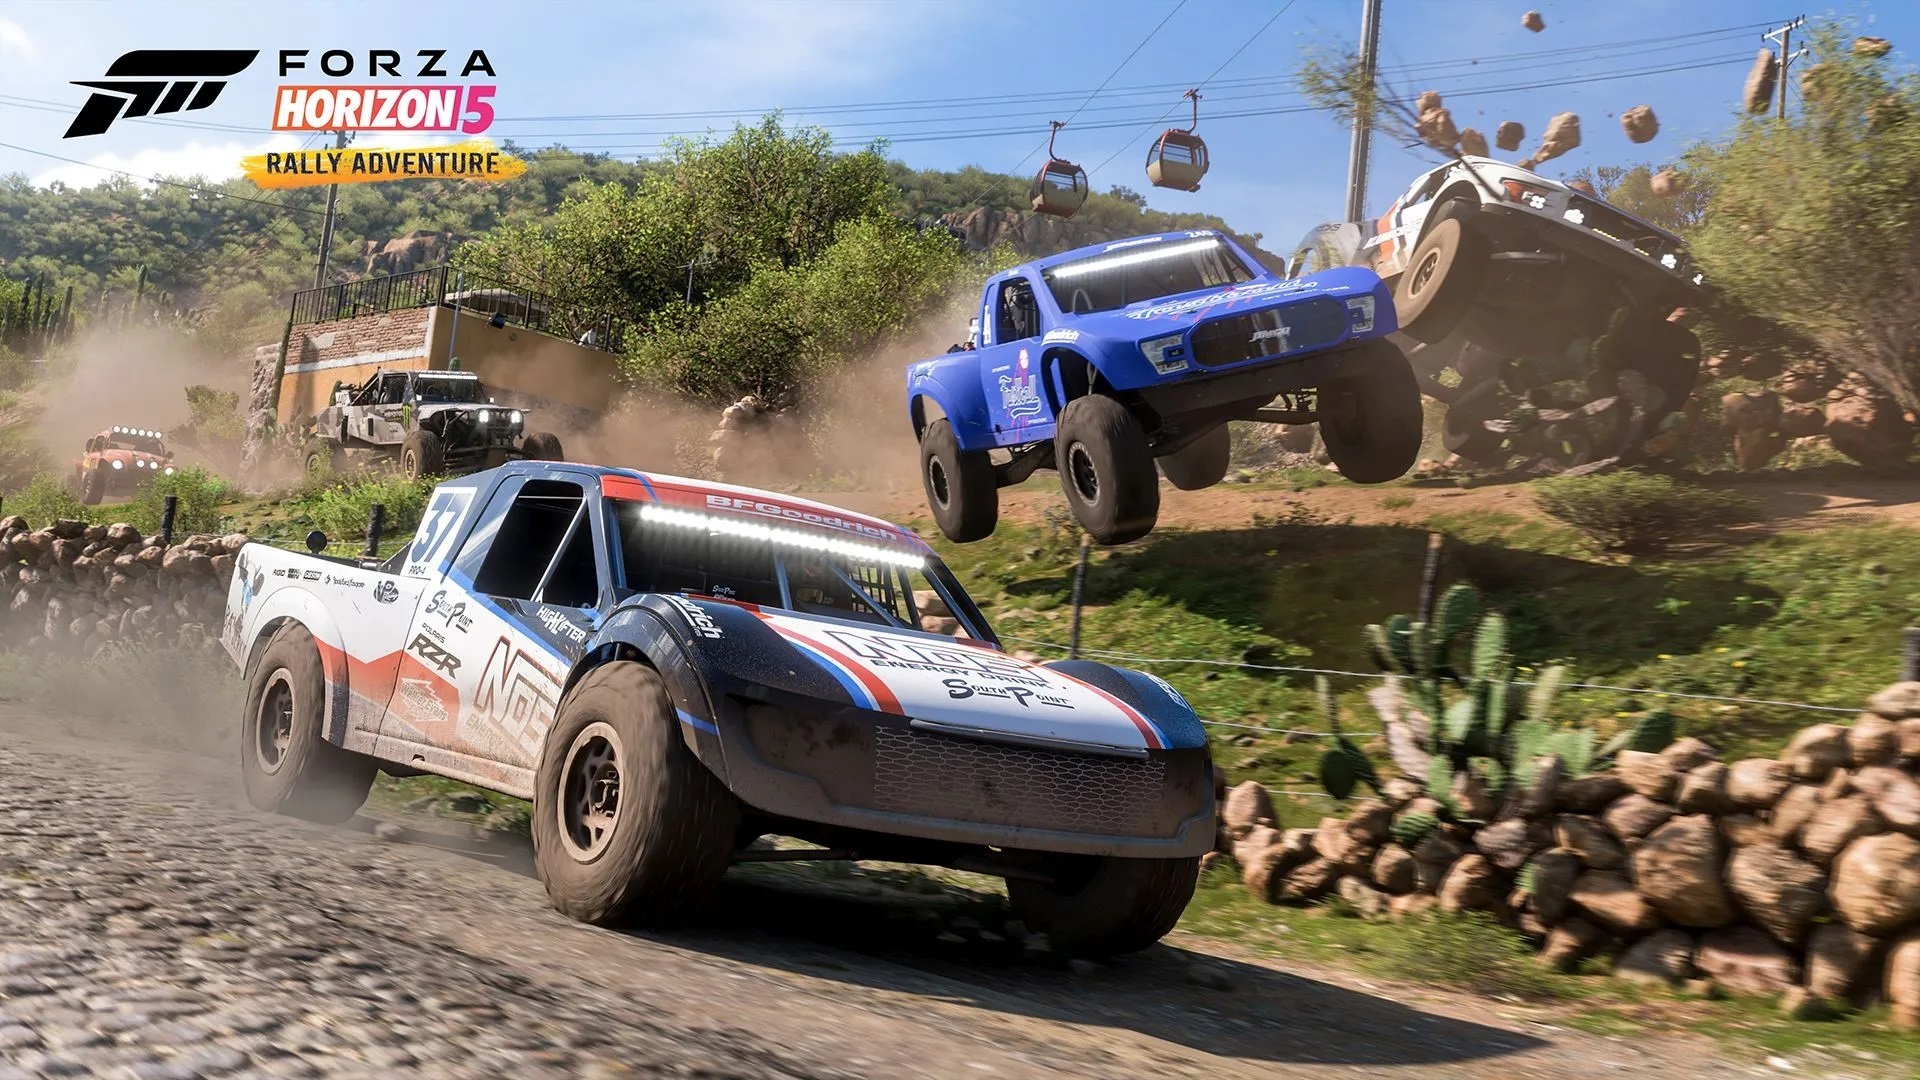 Forza Horizon 5 announces its second major content update, Rally Adventure